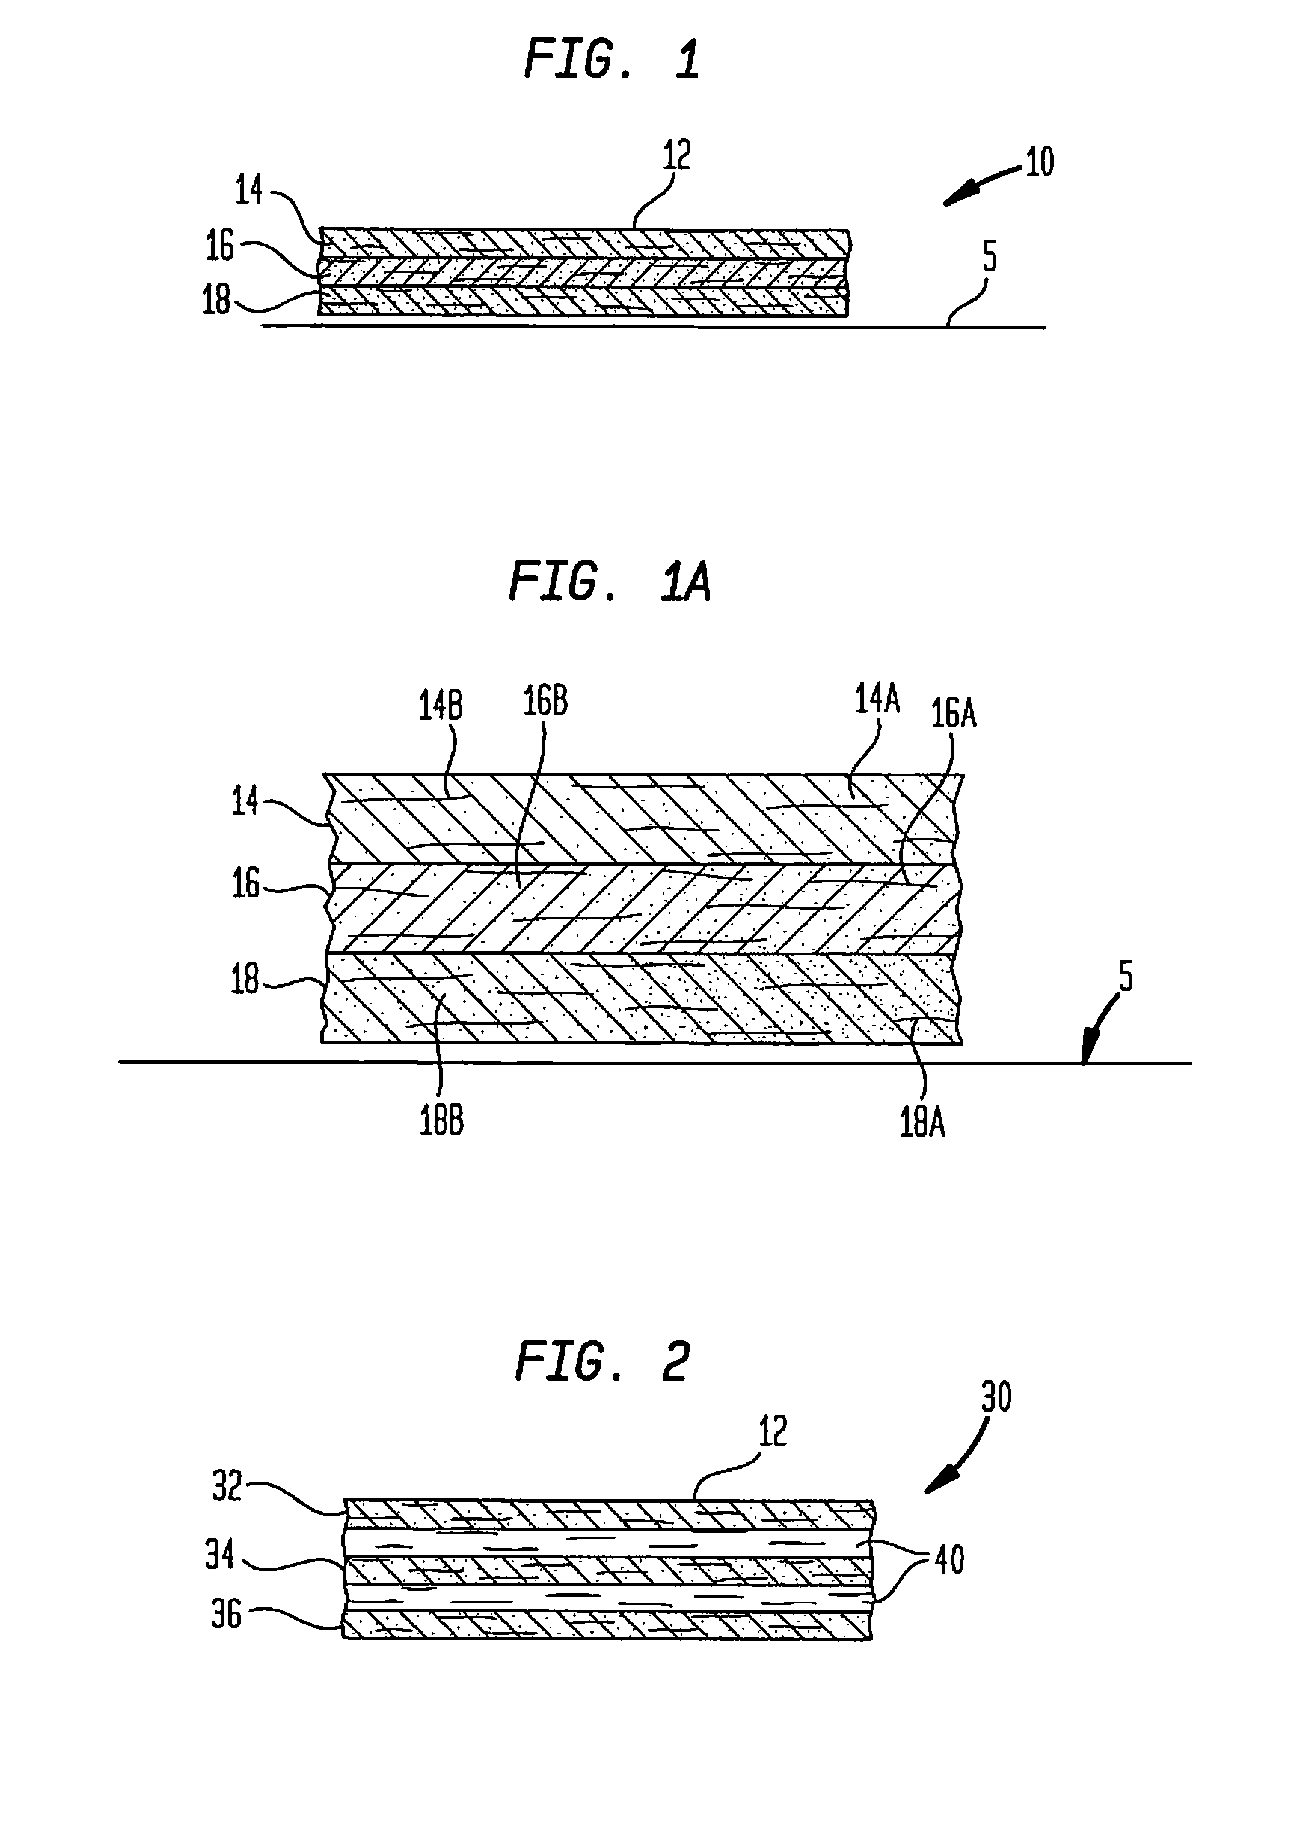 Multilayer Conductive Appliance Having Wound Healing and Analgesic Properties